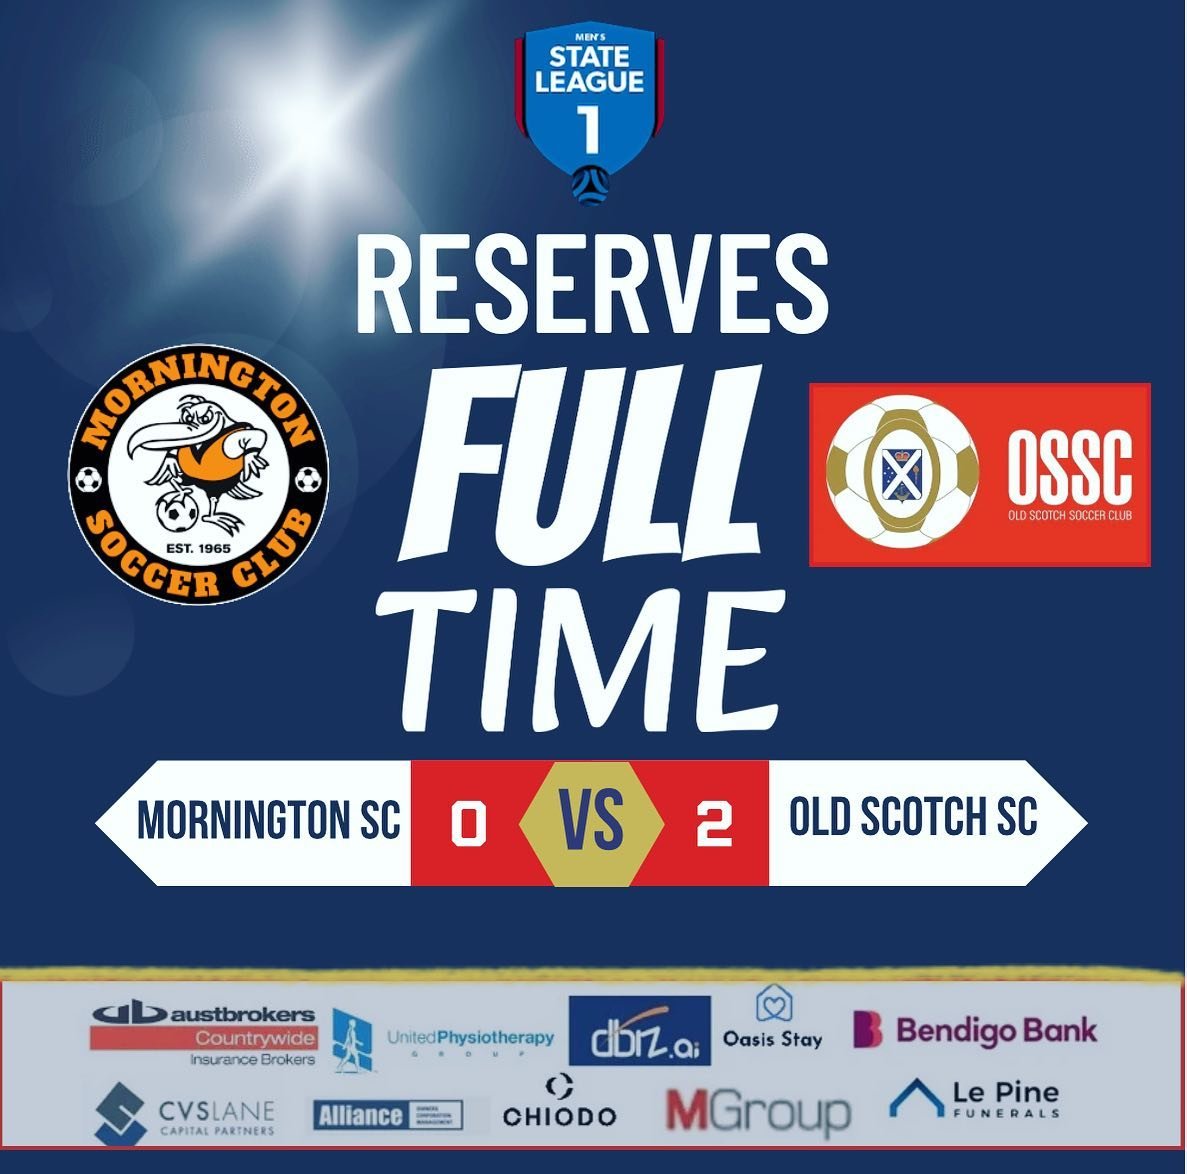 Great win!

#reserves #ossc